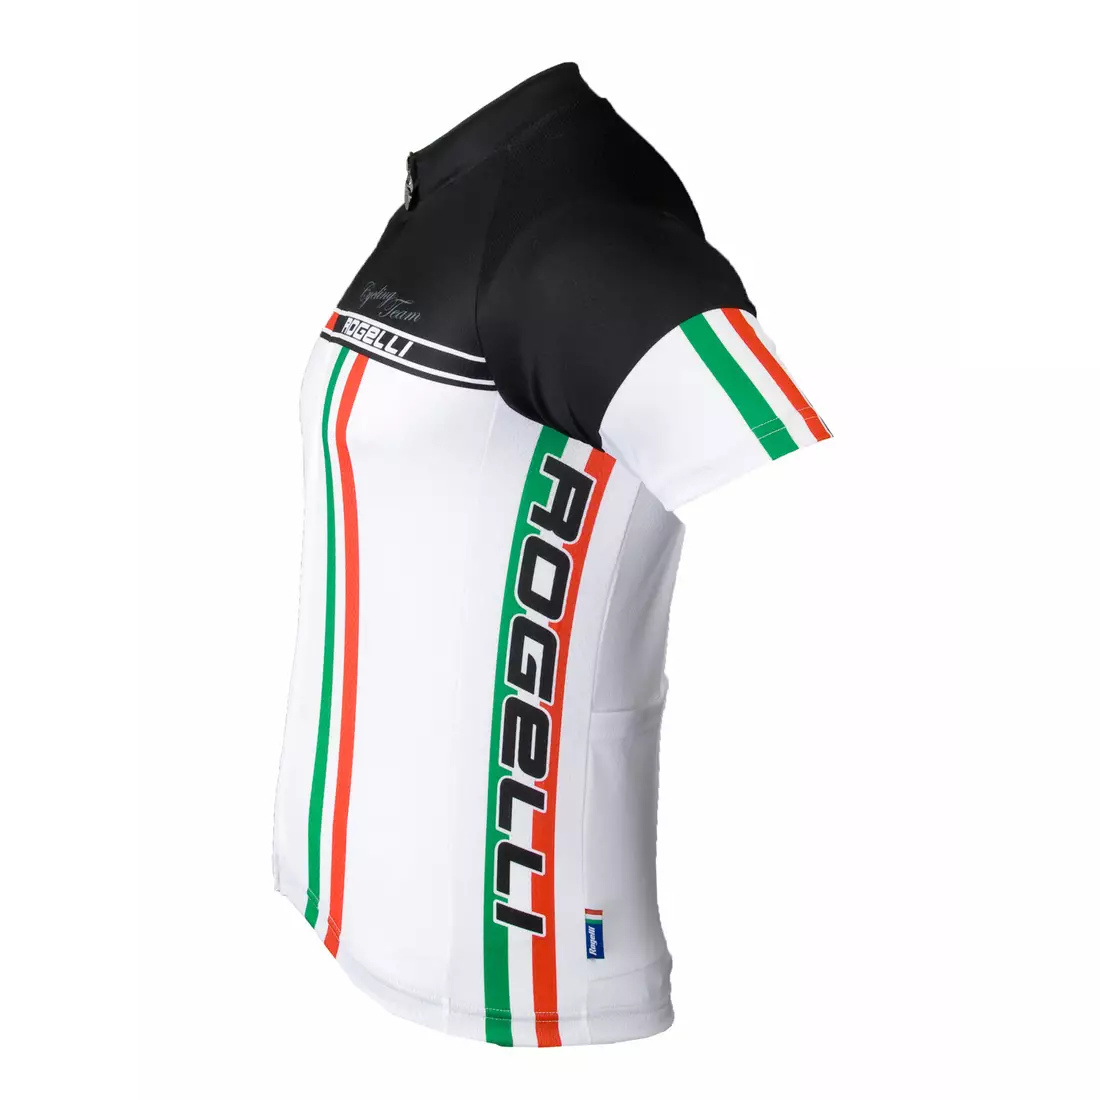 ROGELLI team cycling jersey 001.960, White